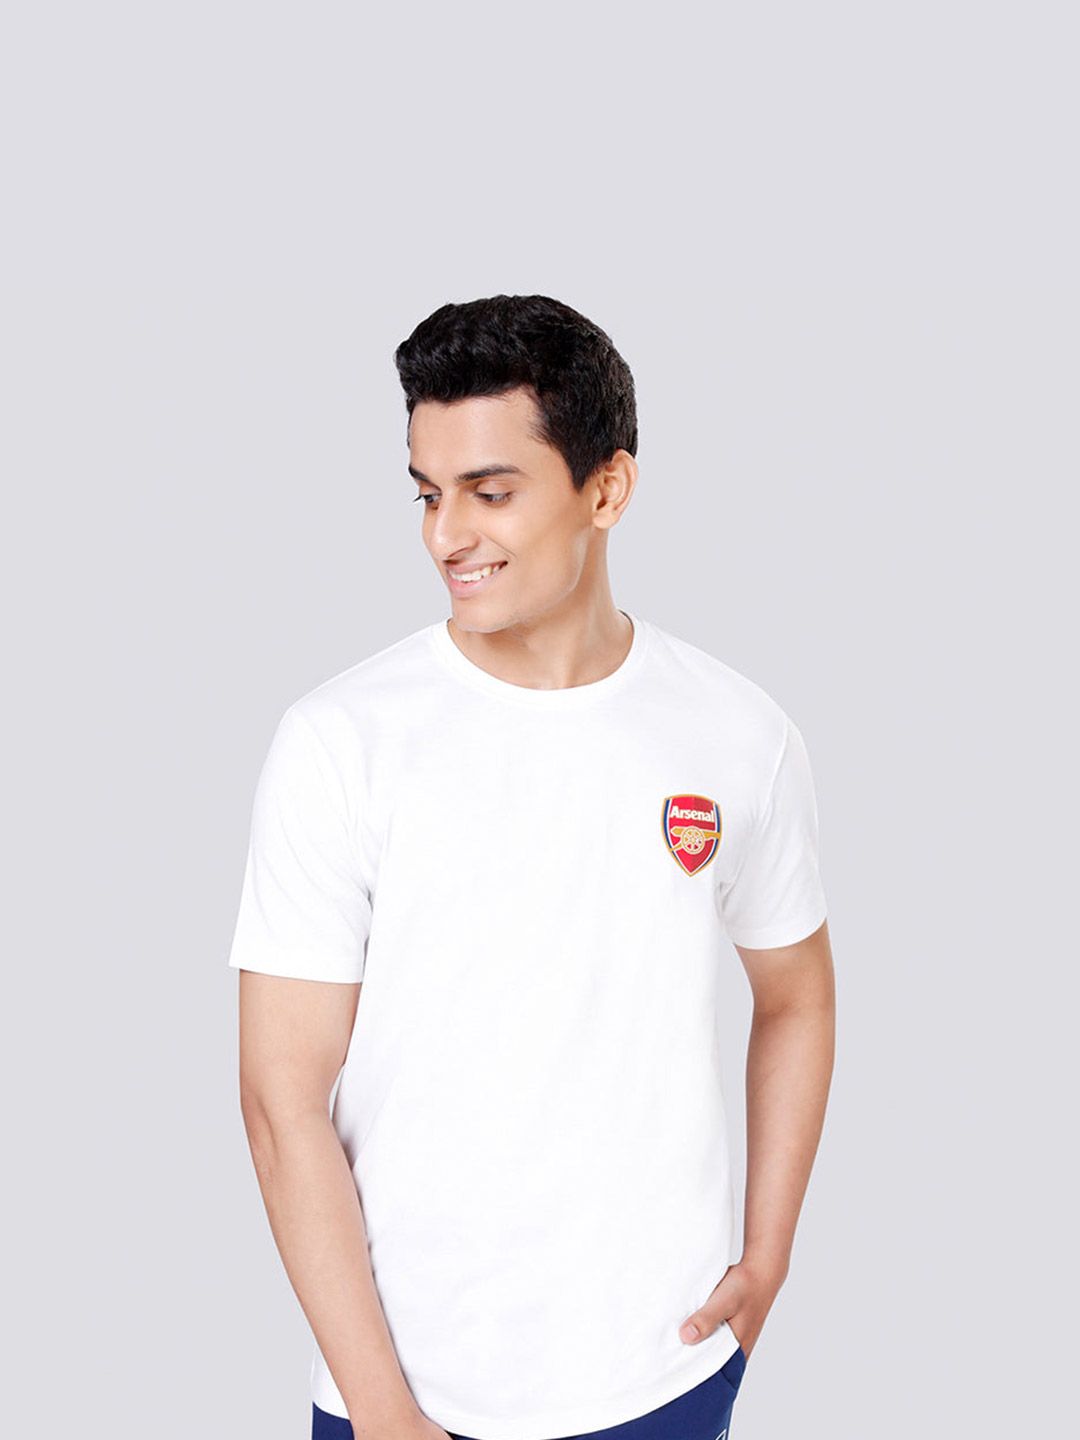 Kit Changed For Match: Arsenal 22-23 Whiteout Kit Released - Footy